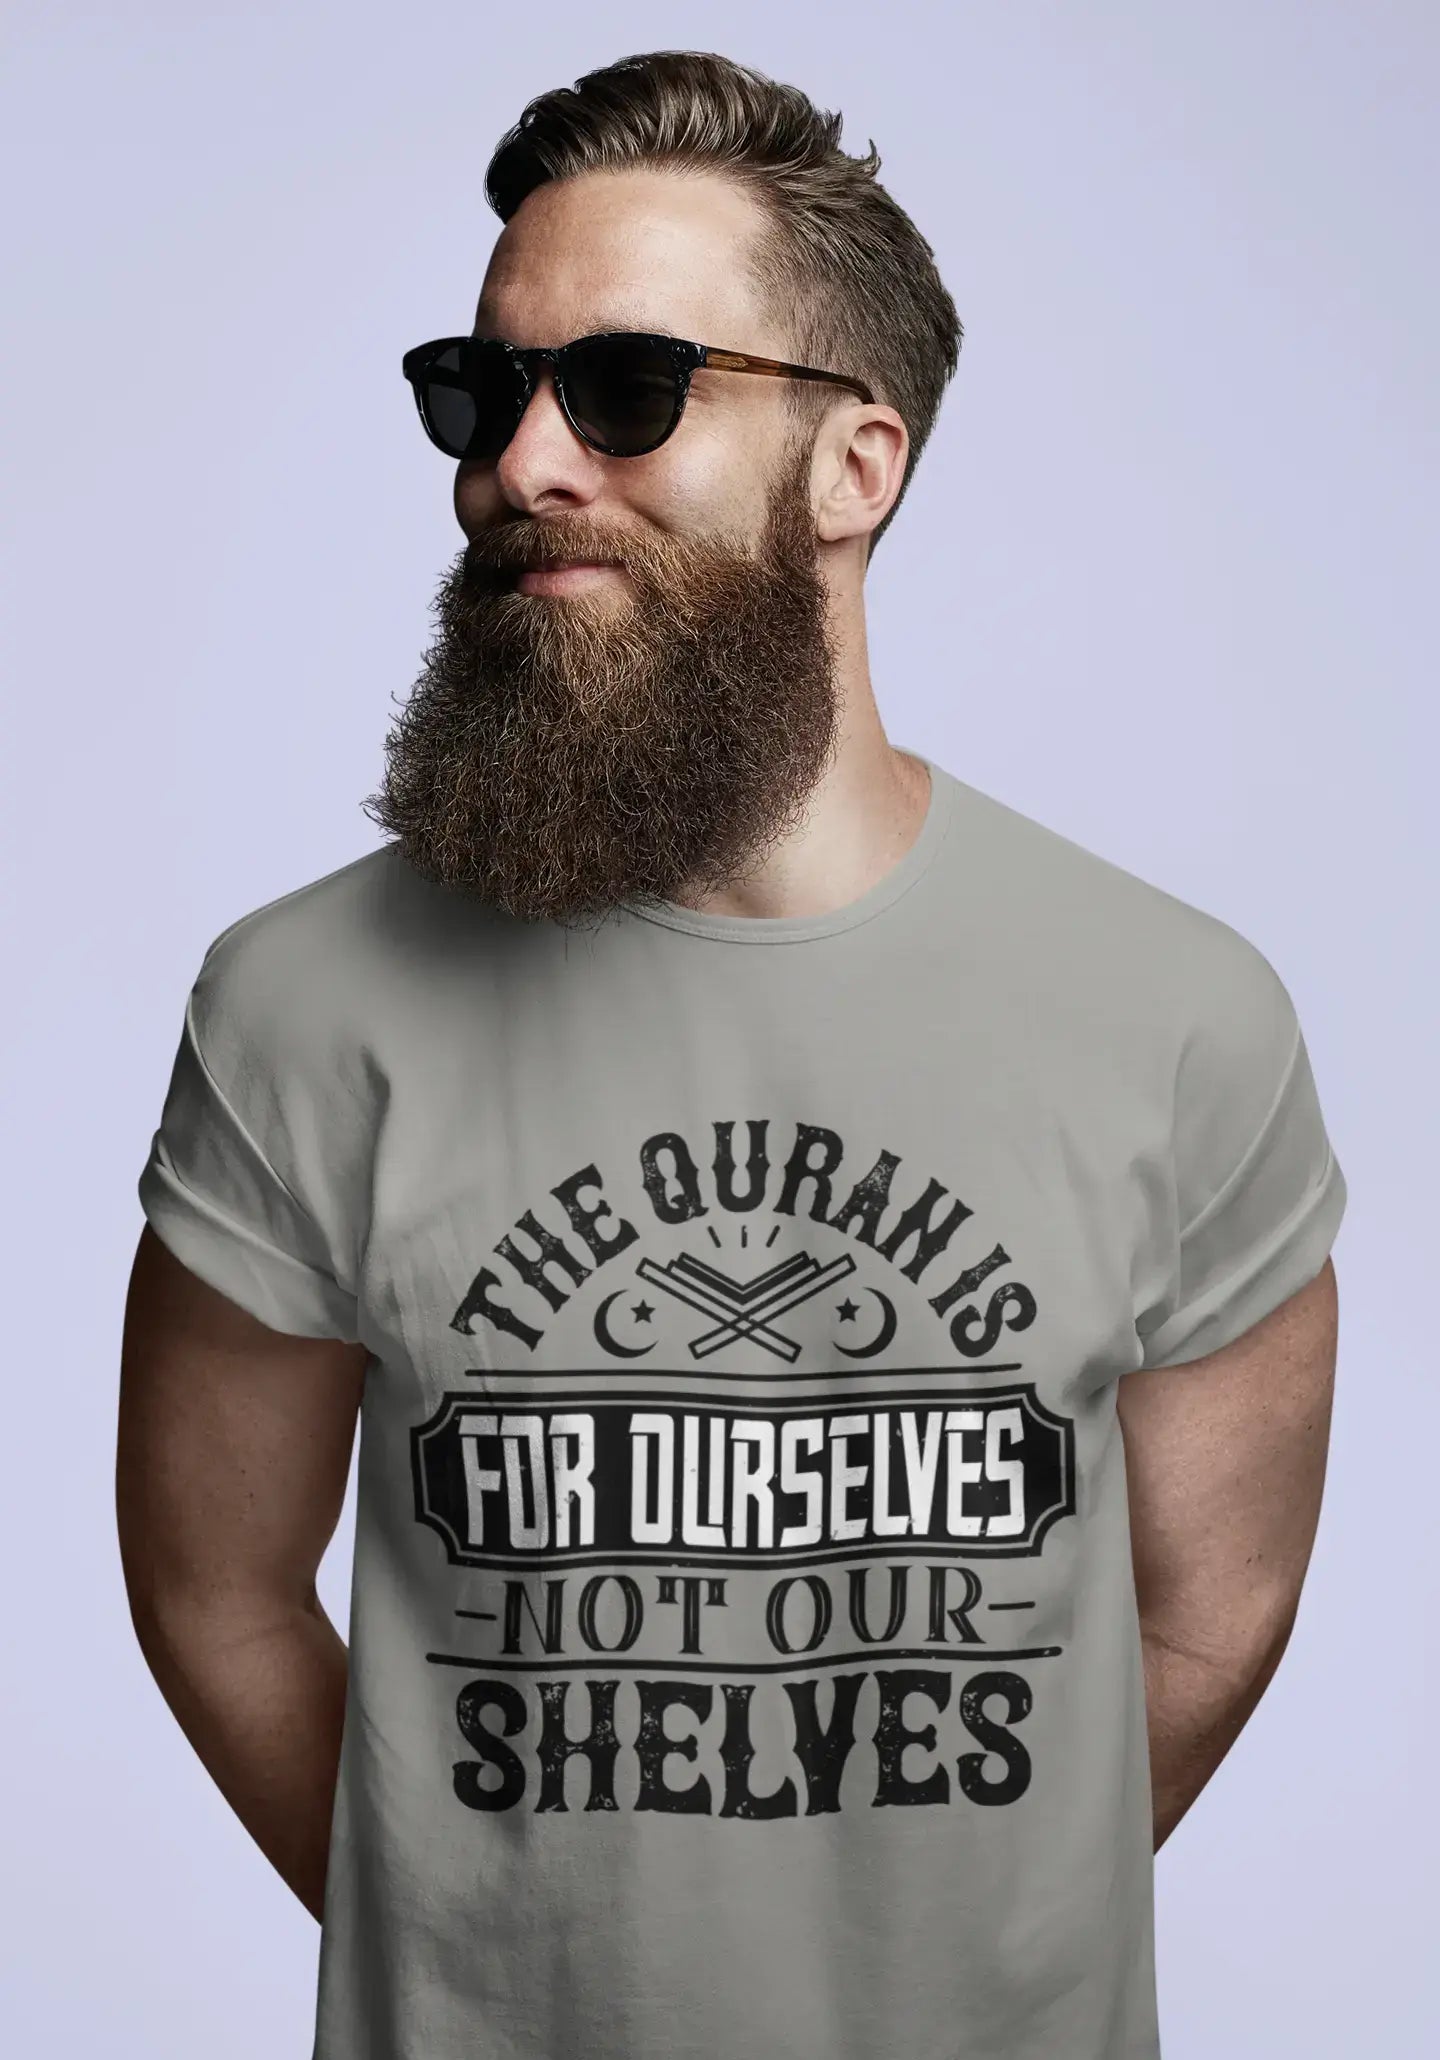 ULTRABASIC Men's T-Shirt The Quran is For Ourselves Not Our Shelves - Muslim Tee Shirt